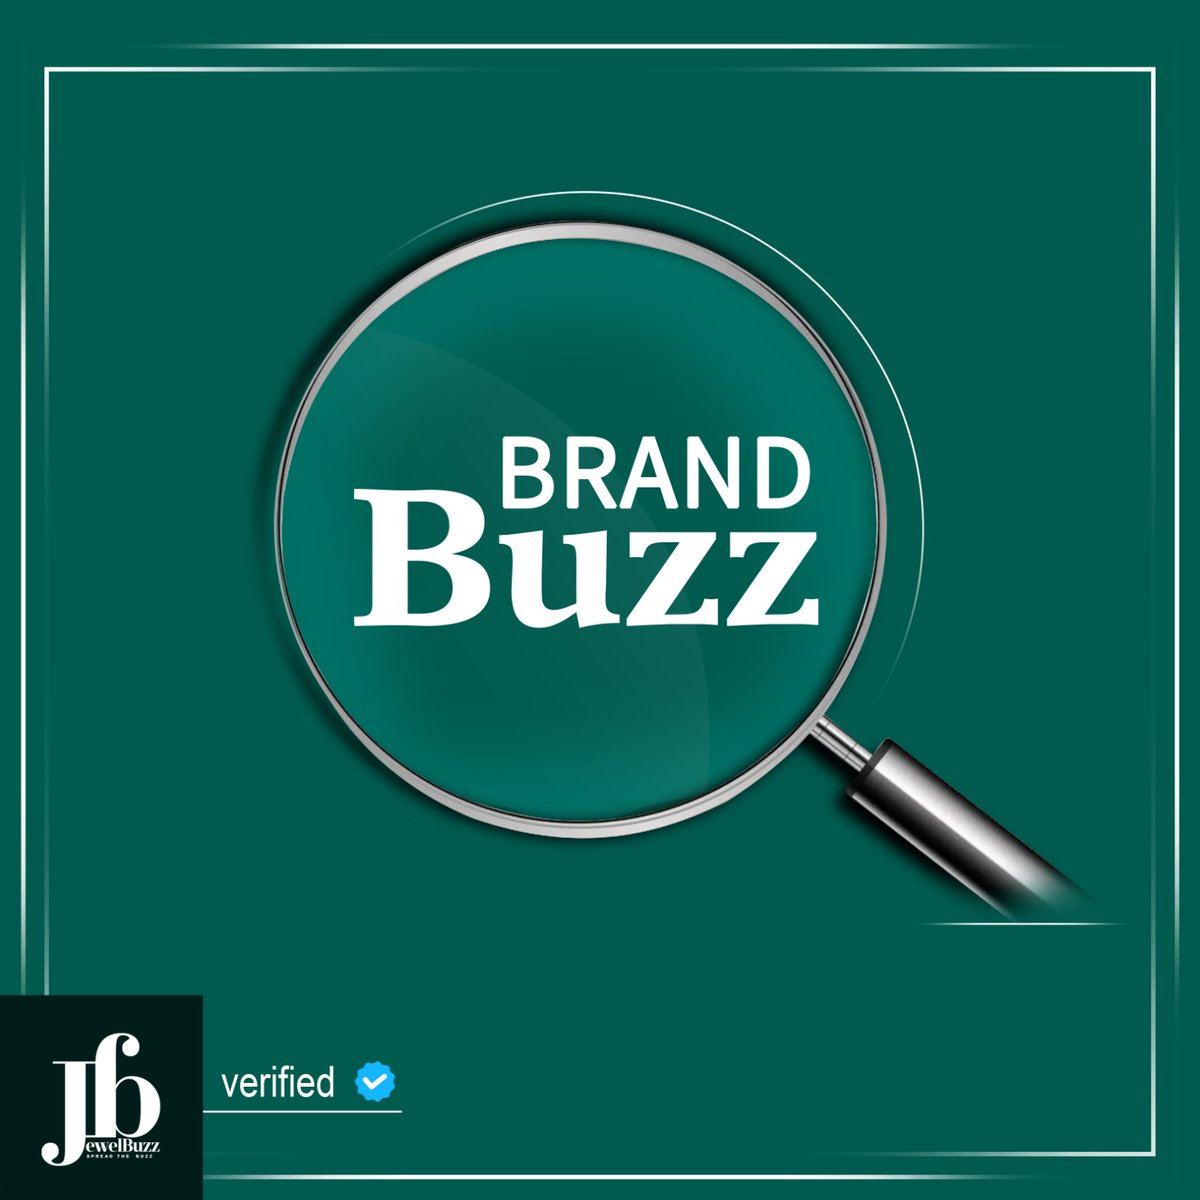 JB-JewelBuzz Verified

BrandBuzz  – creating the right buzz to boost your brand!

'Adorning Traditions in Every Gleam of Silver' With Purple Jewels Pvt. Ltd.

Bengaluru - 9844175954
Chennai - 9841110697
Mumbai - 9920274644
Hyderabad - 9035130300

purplejewels.in

*For